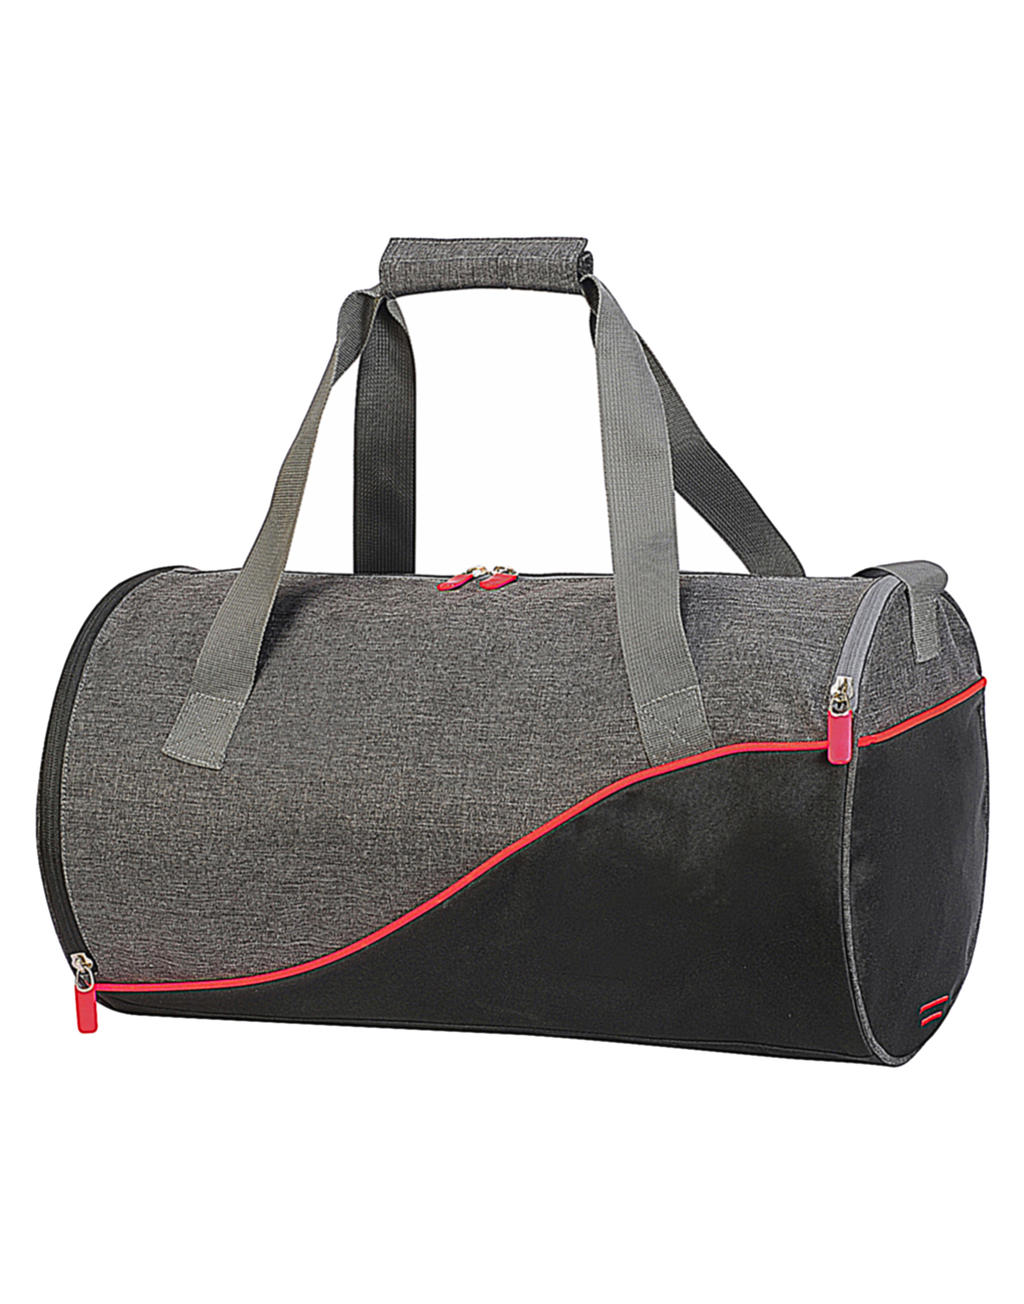 Andros Daily Sports Bag